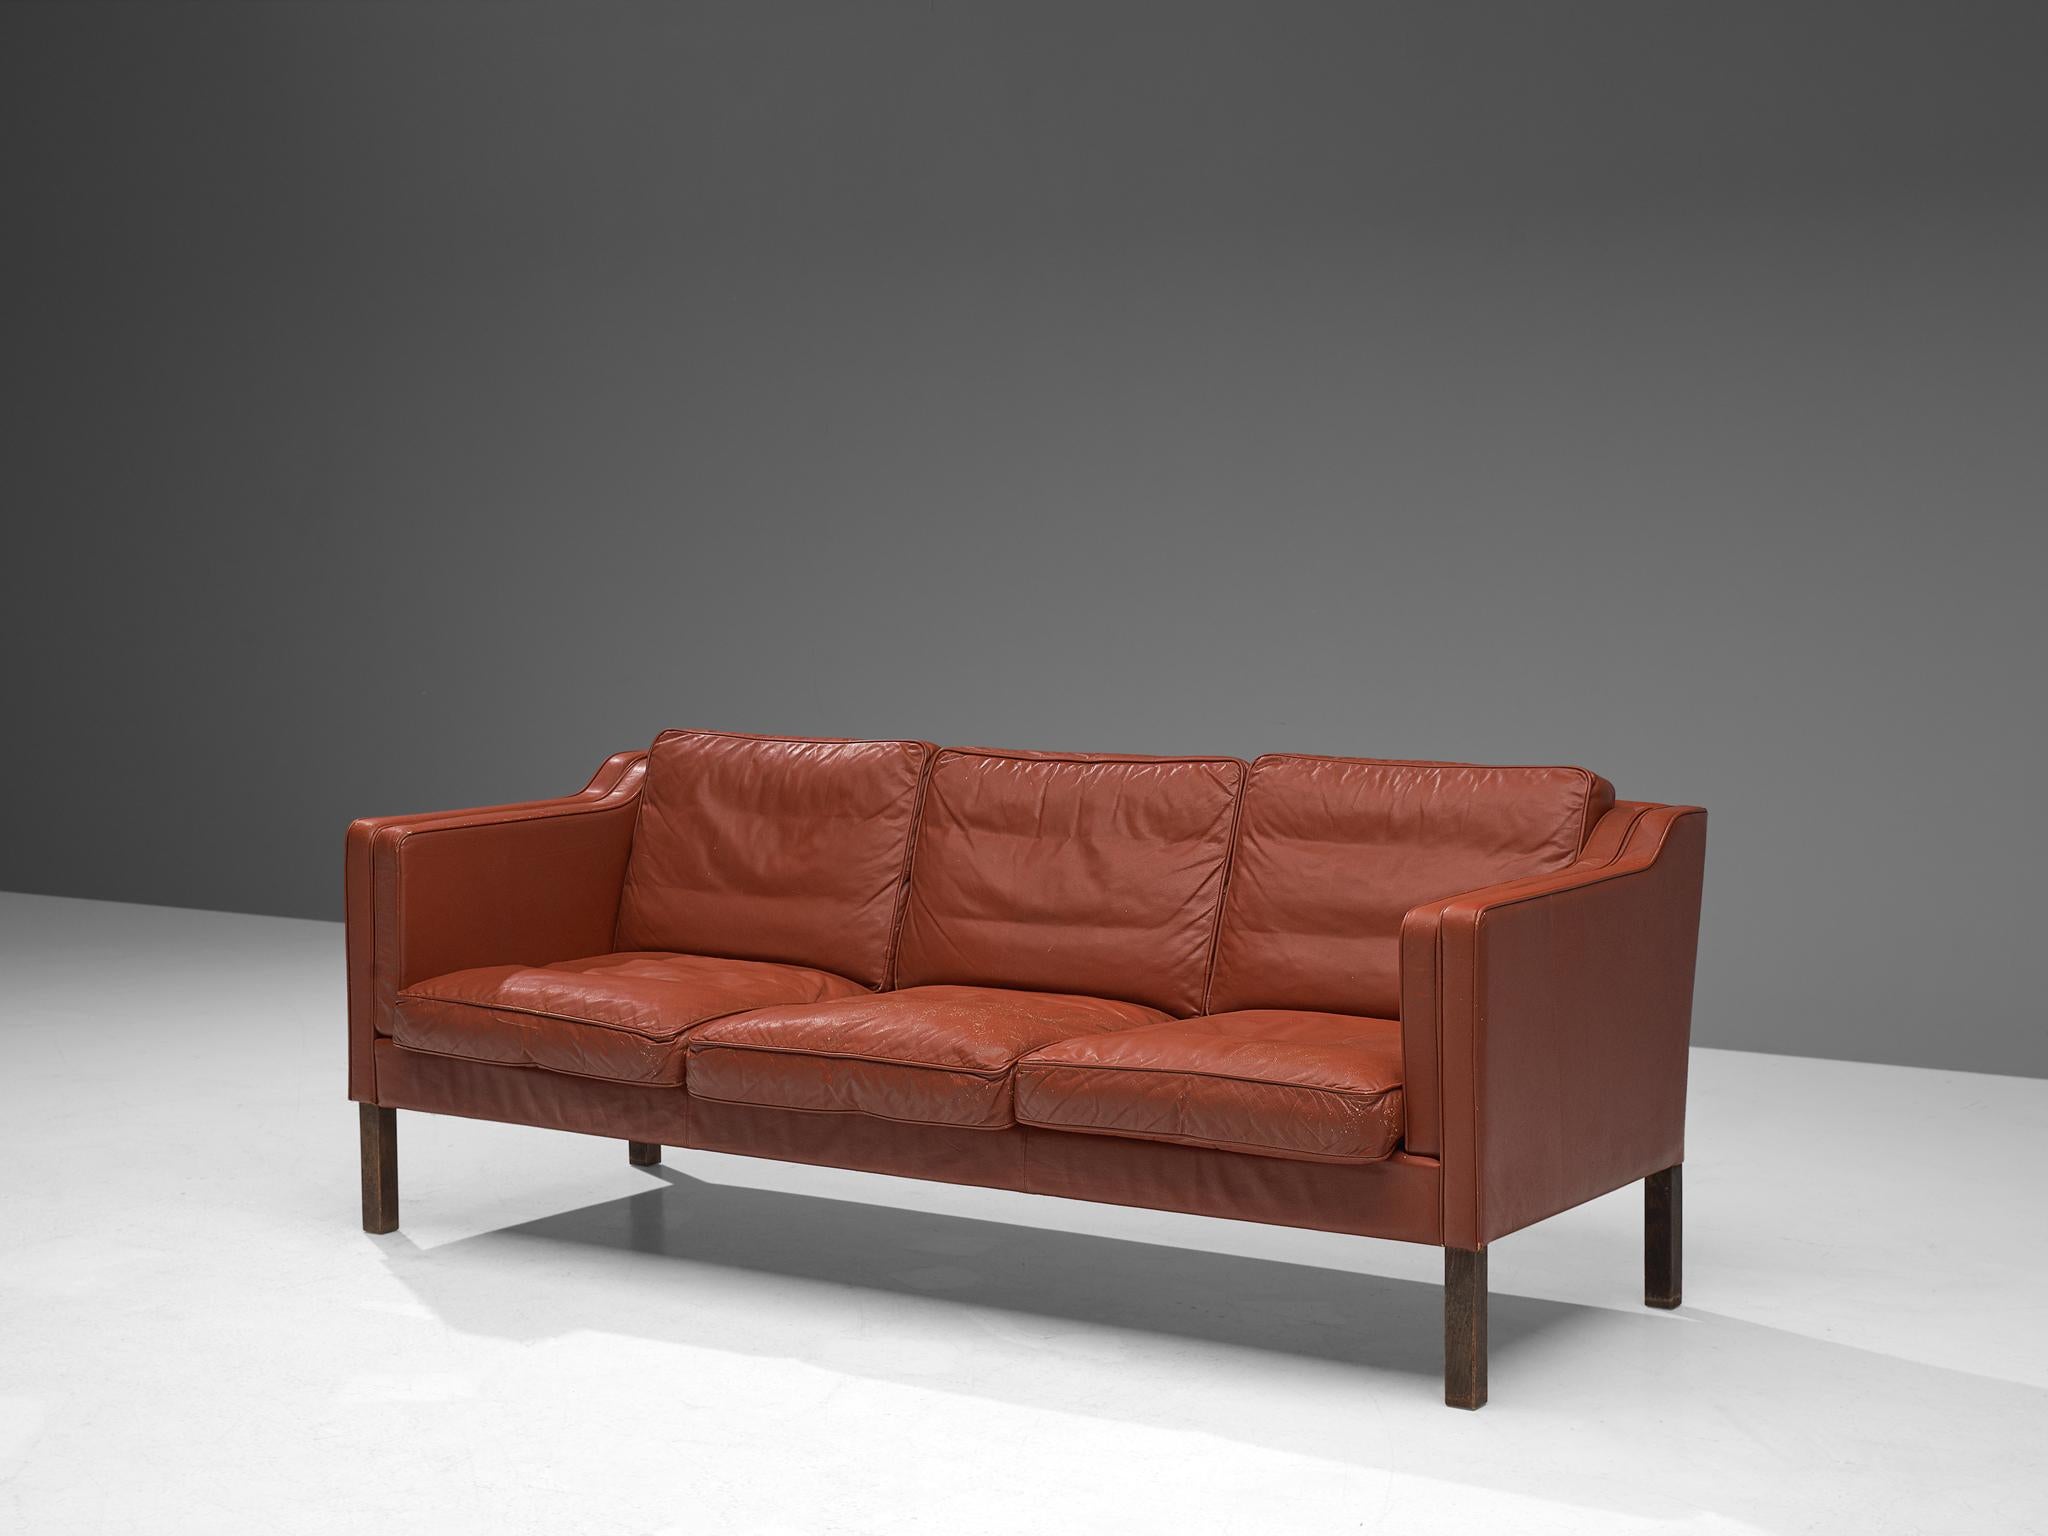 Three-seat sofa, leather and stained oak, Denmark, 1960s

Very well balanced three seater sofa designed in the manner of Børge Mogensen. This model strongly resembles the famous '2213' sofa designed by Mogensen for his own home, in his goal to